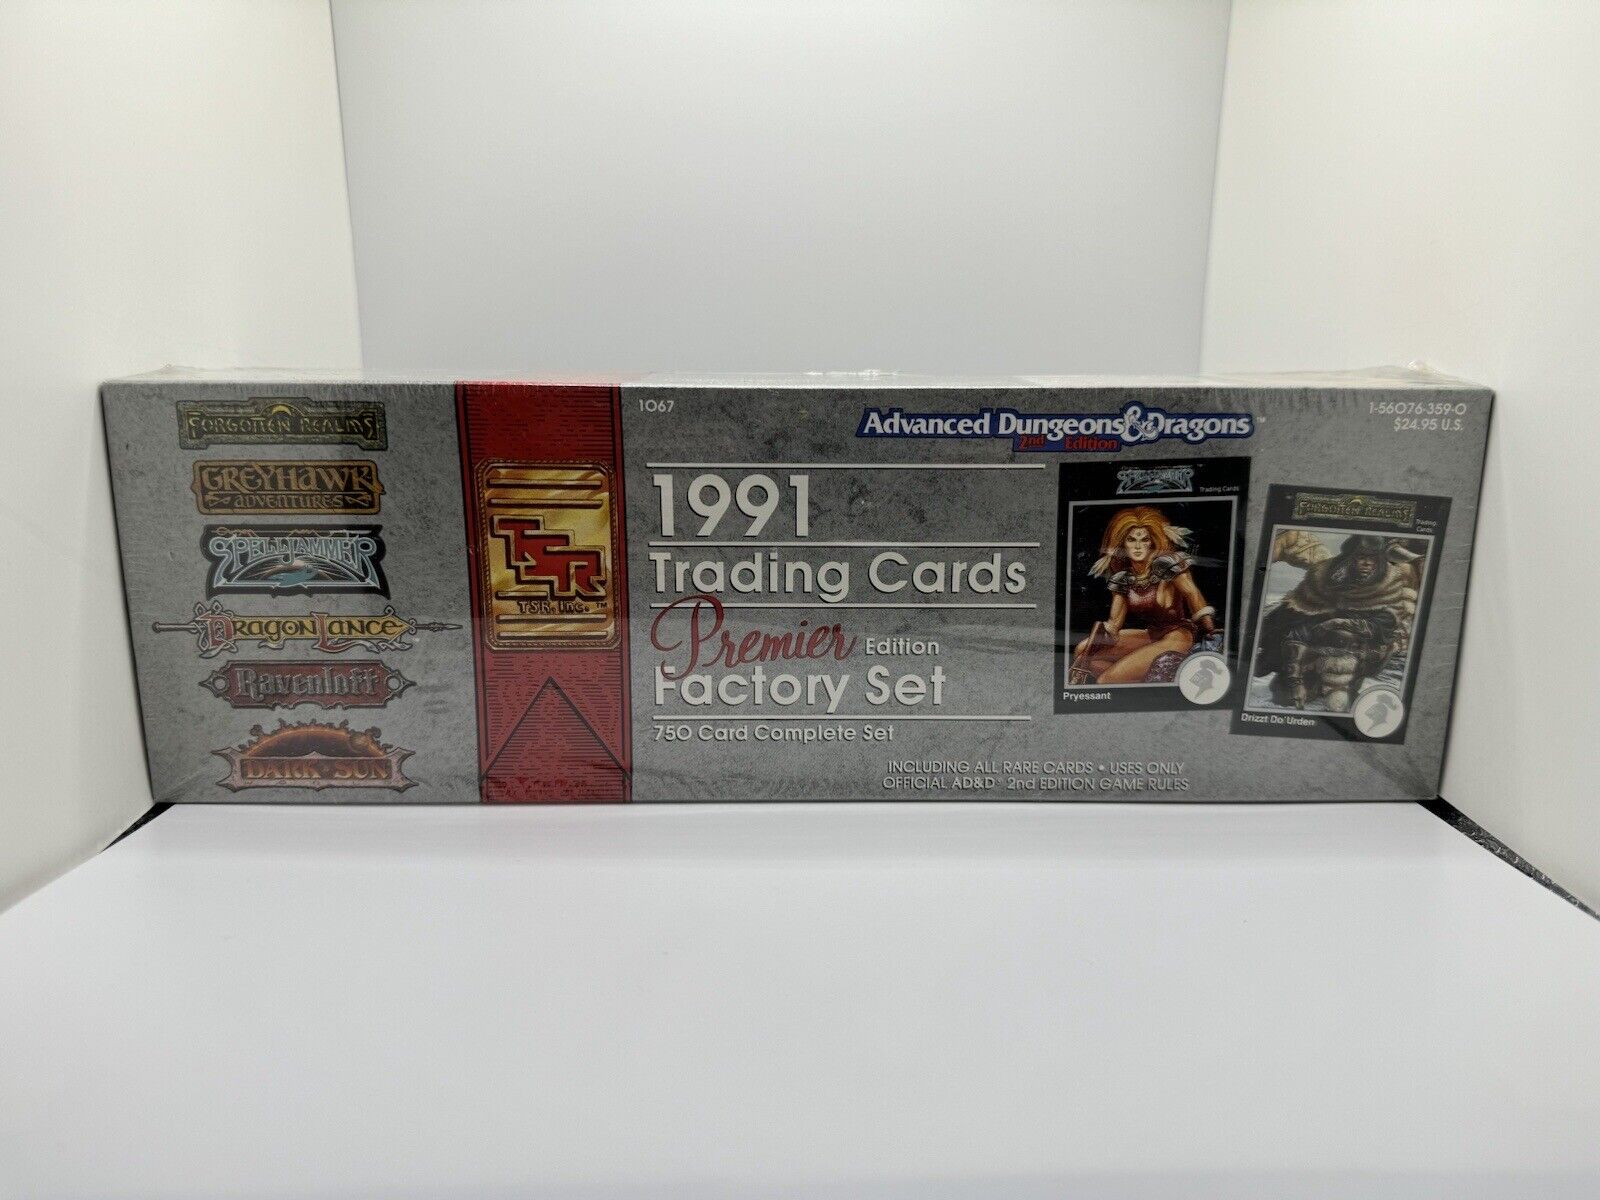 1991 TSR Advanced Dungeons Dragons Trading Cards Factory Set Factory Sealed